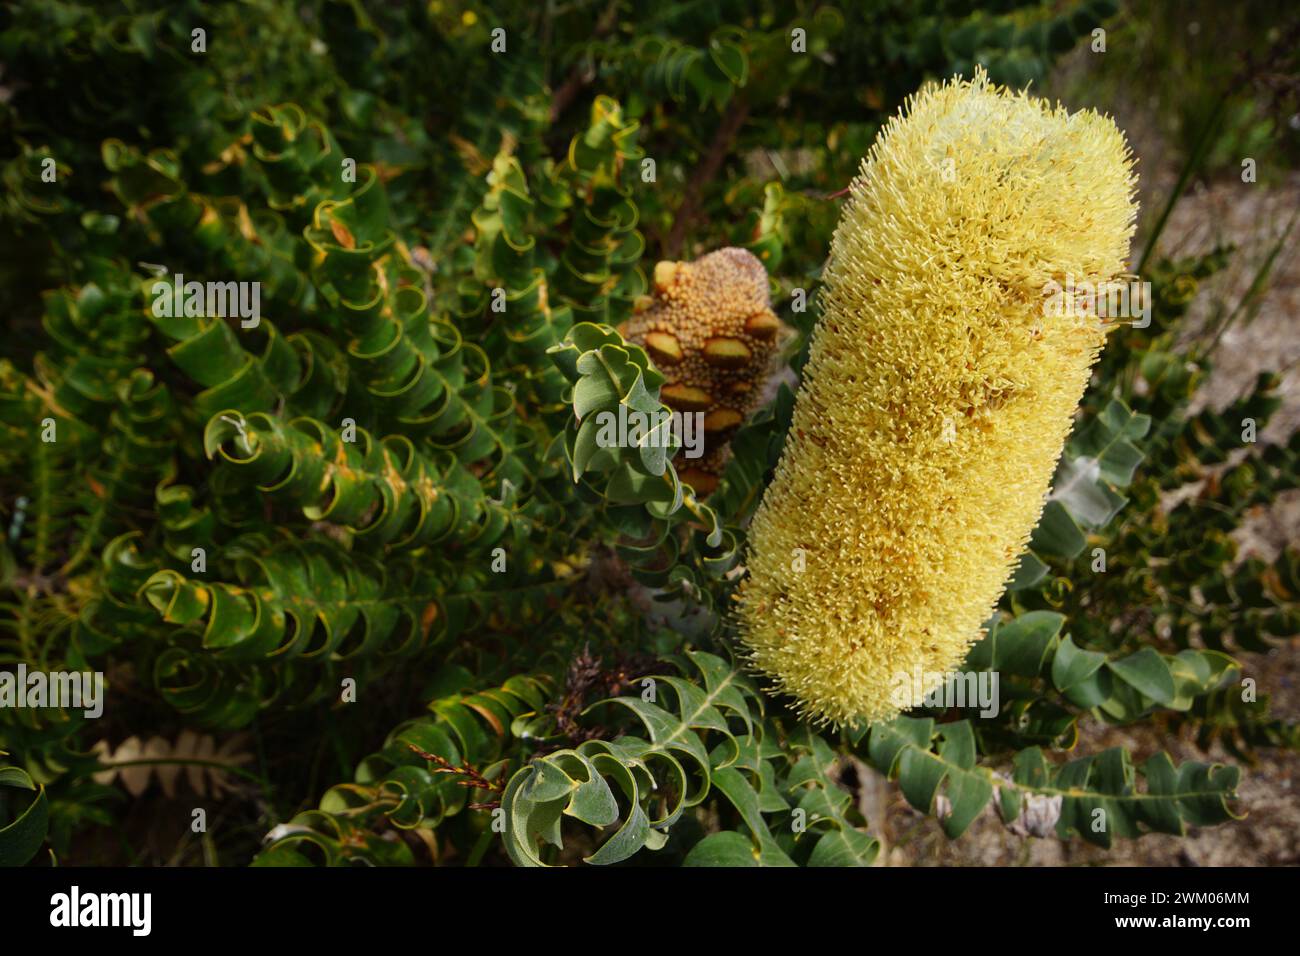 Bull Banksia (Banksia grandis) with yellow flower spike and saw-toothed leaves, in natural habitat, Western Australia Stock Photo